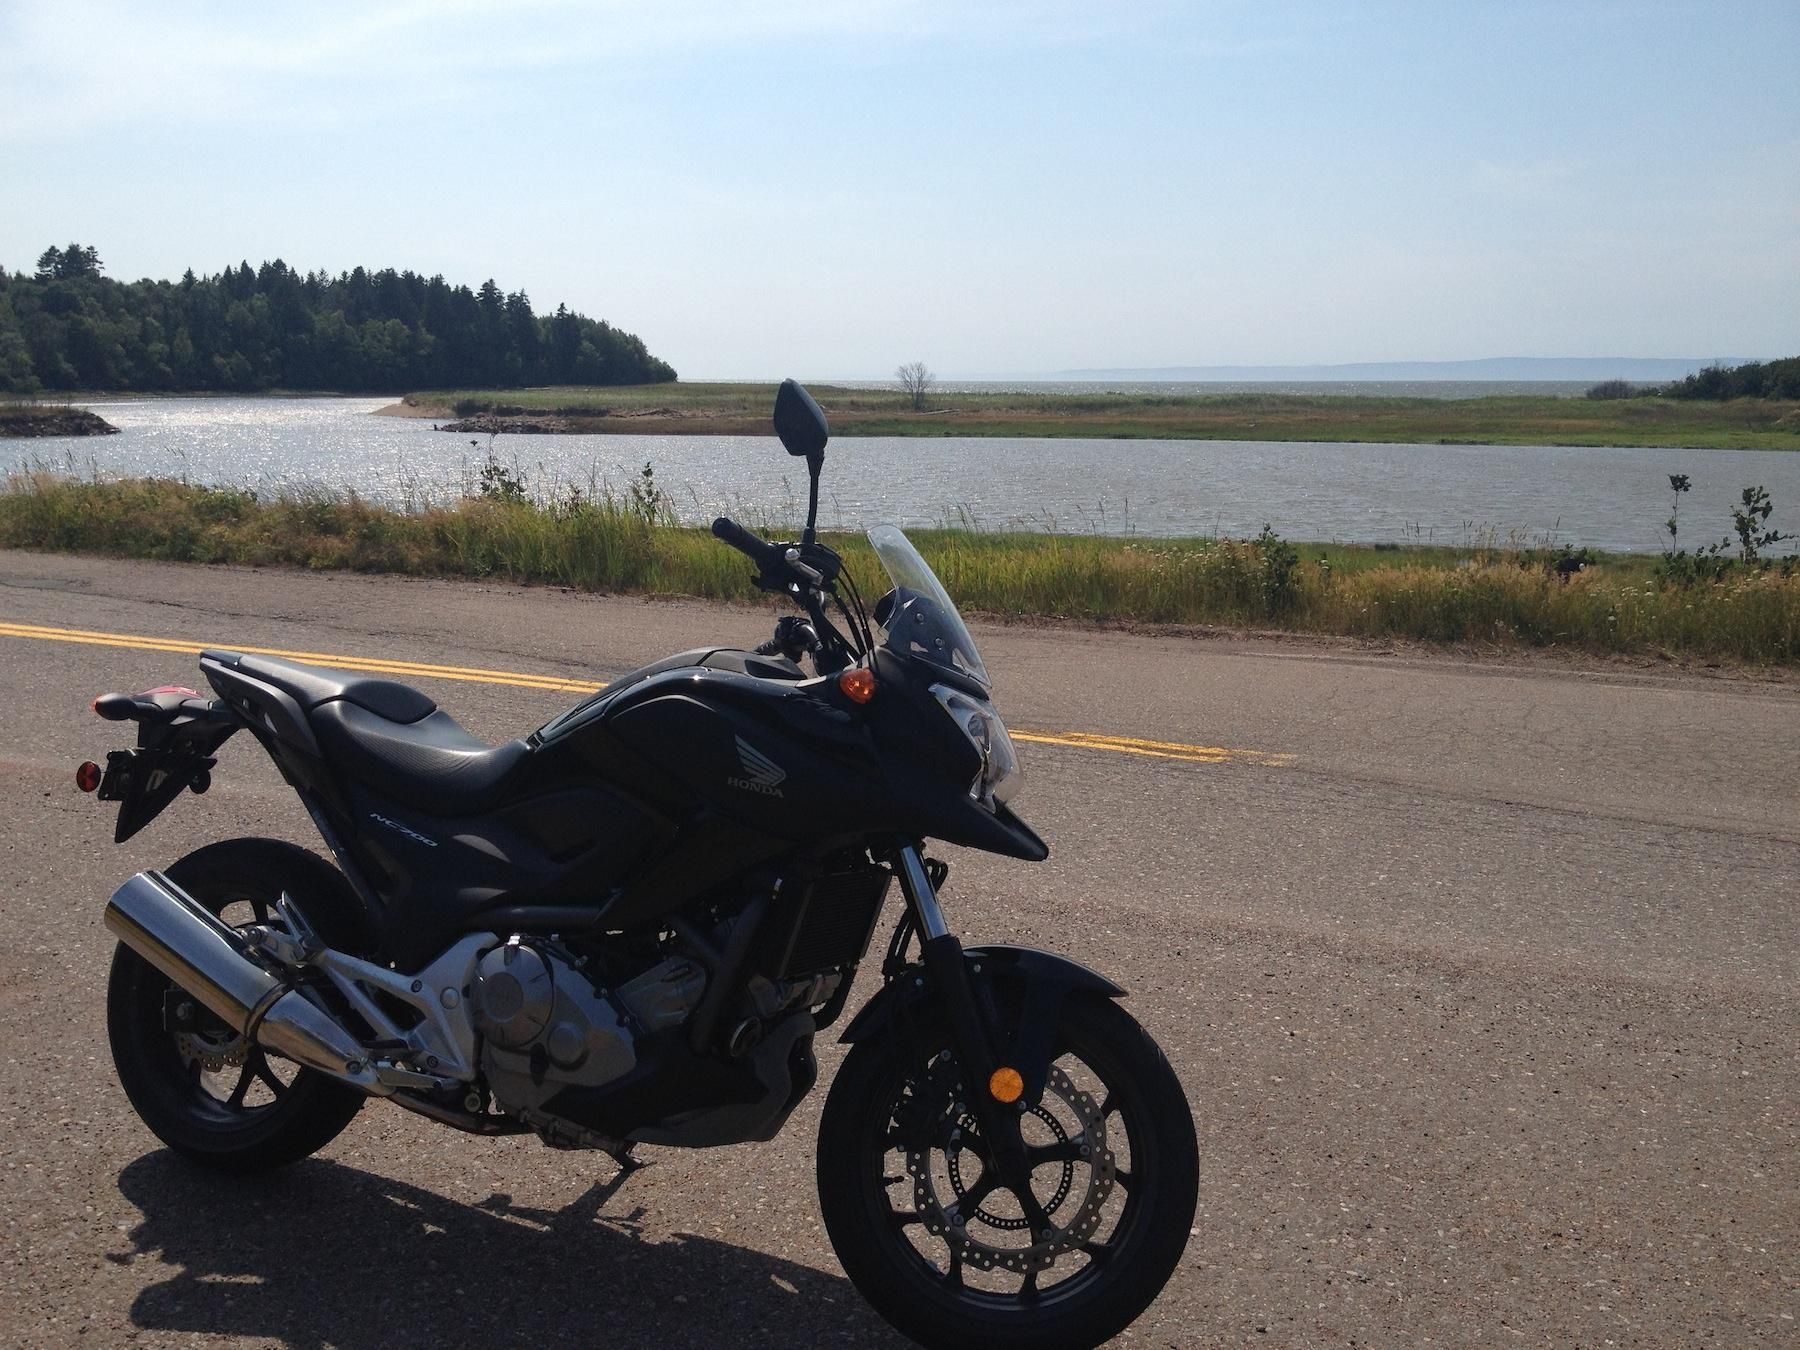 NC700X by the Bay of Fundy - lovely riding 'round here